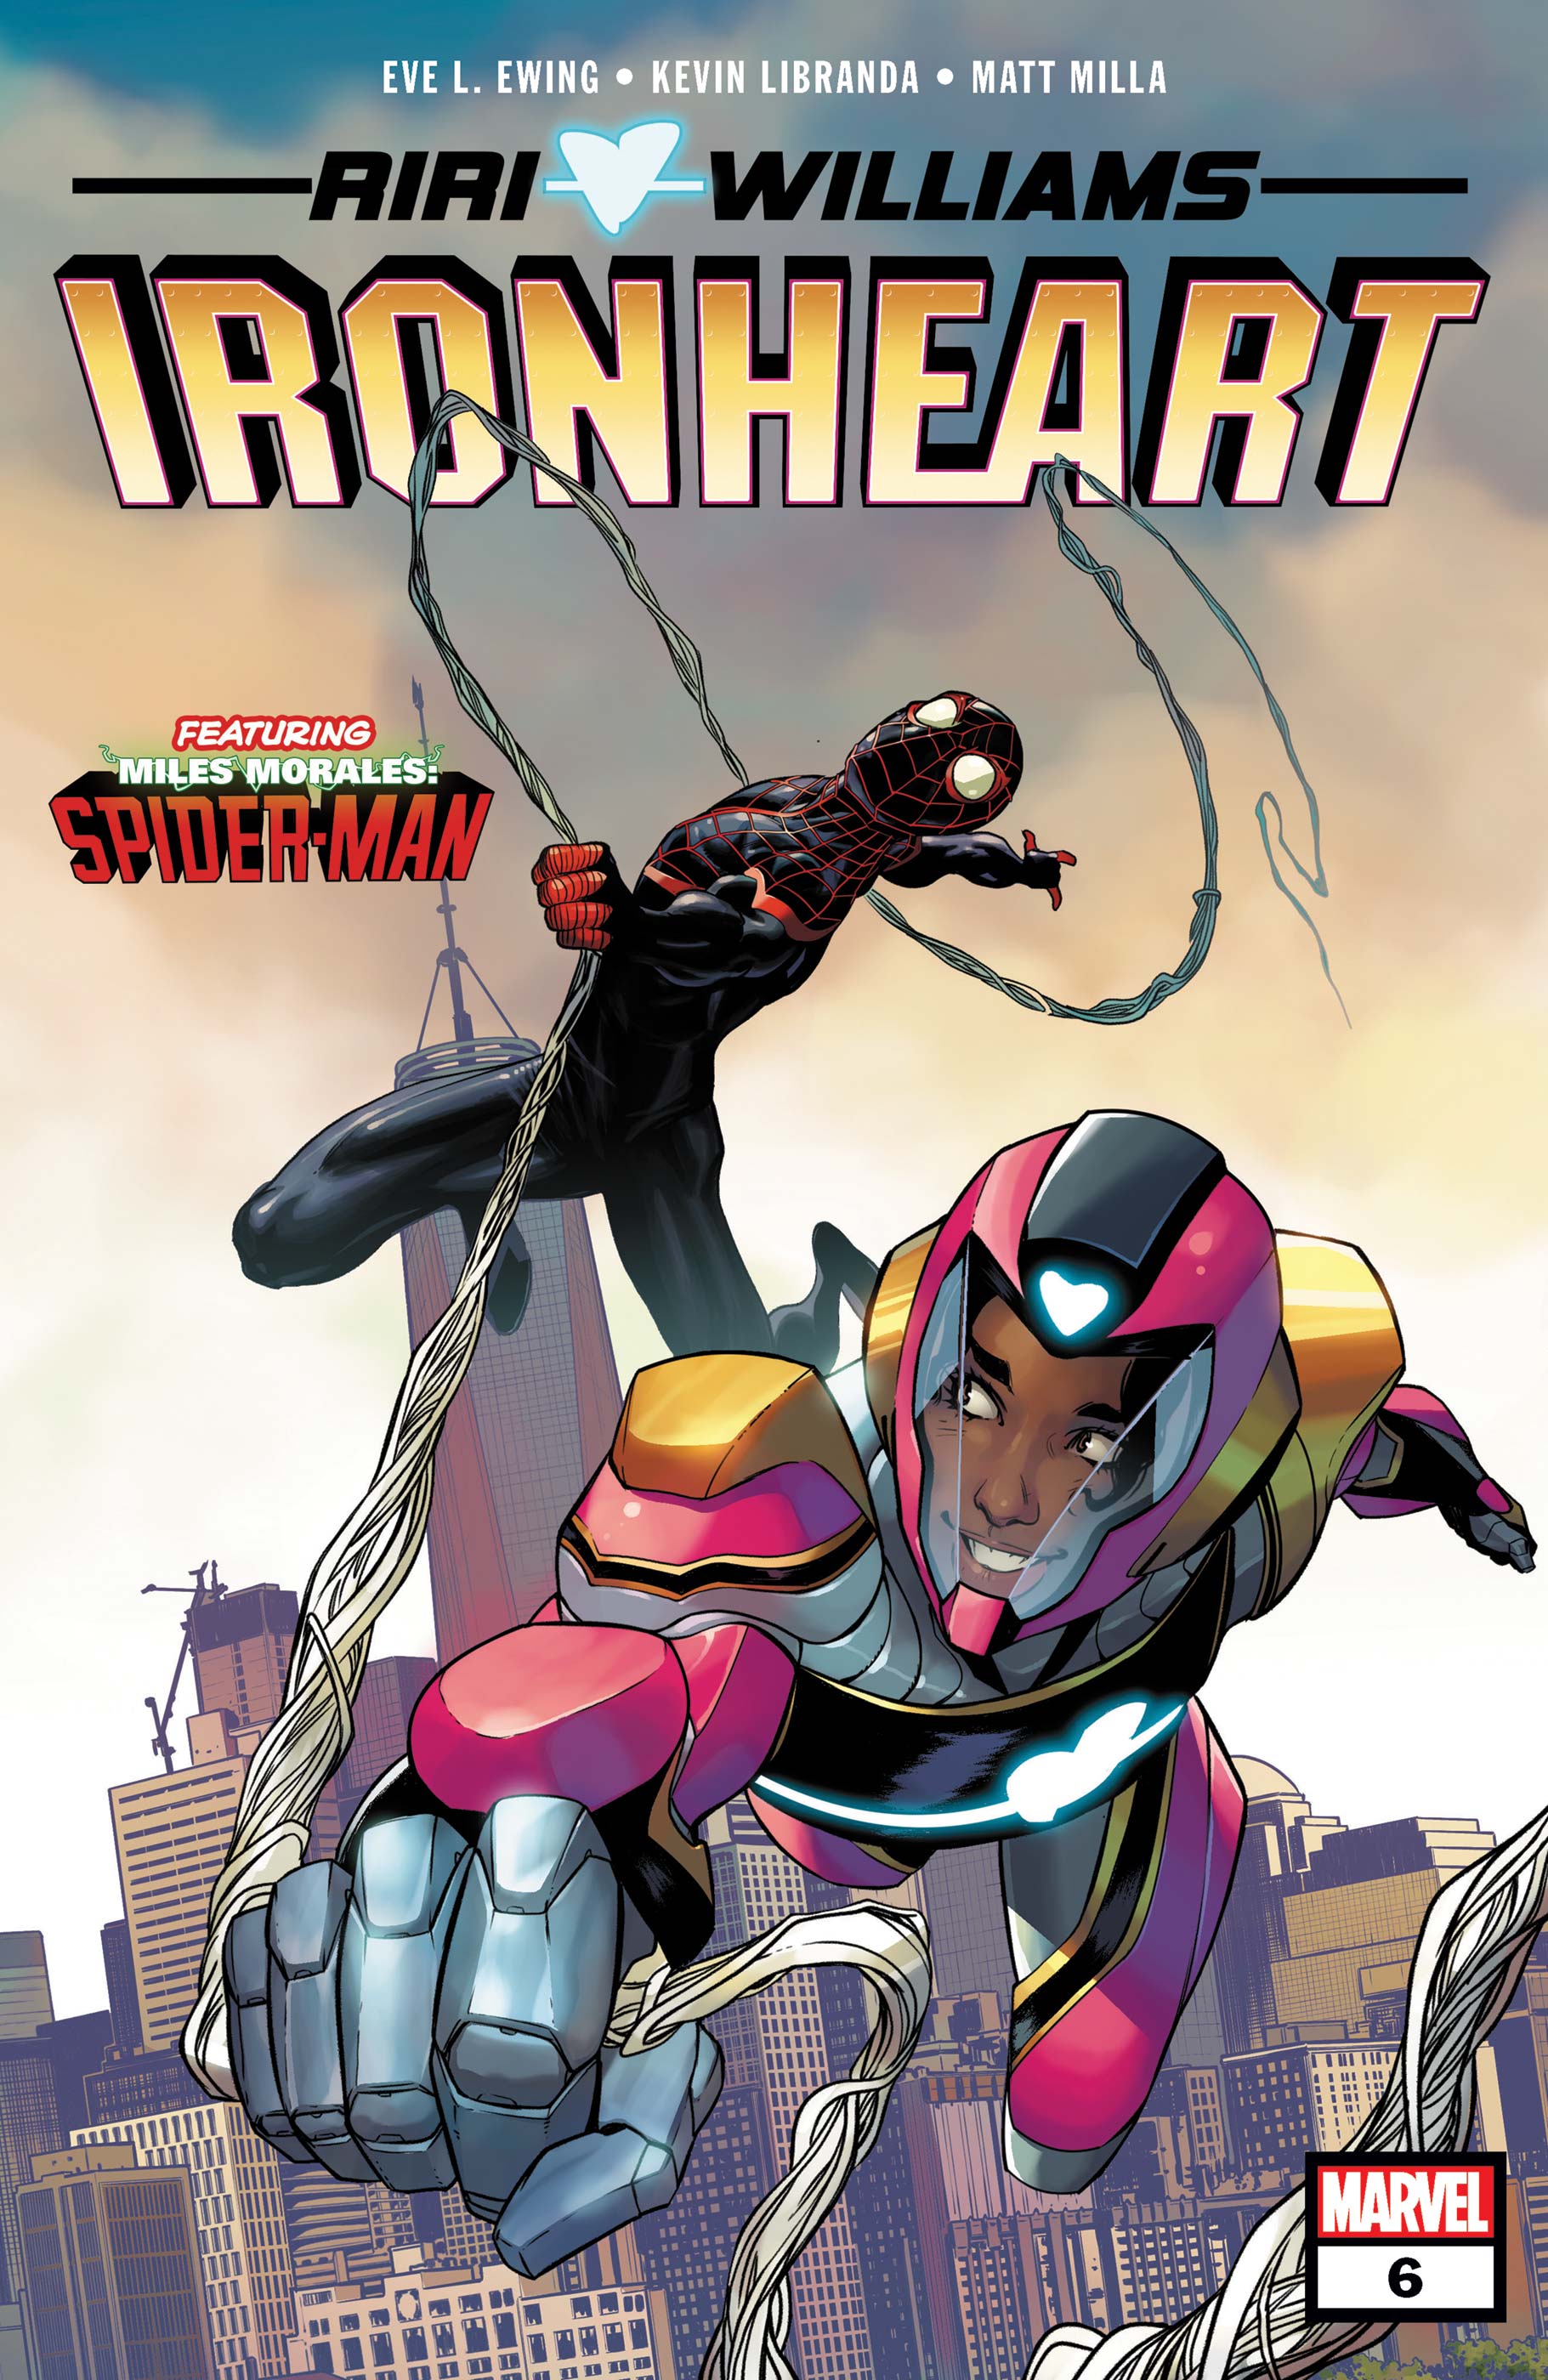 Ironheart #6. Cover by Stefano Caselli.